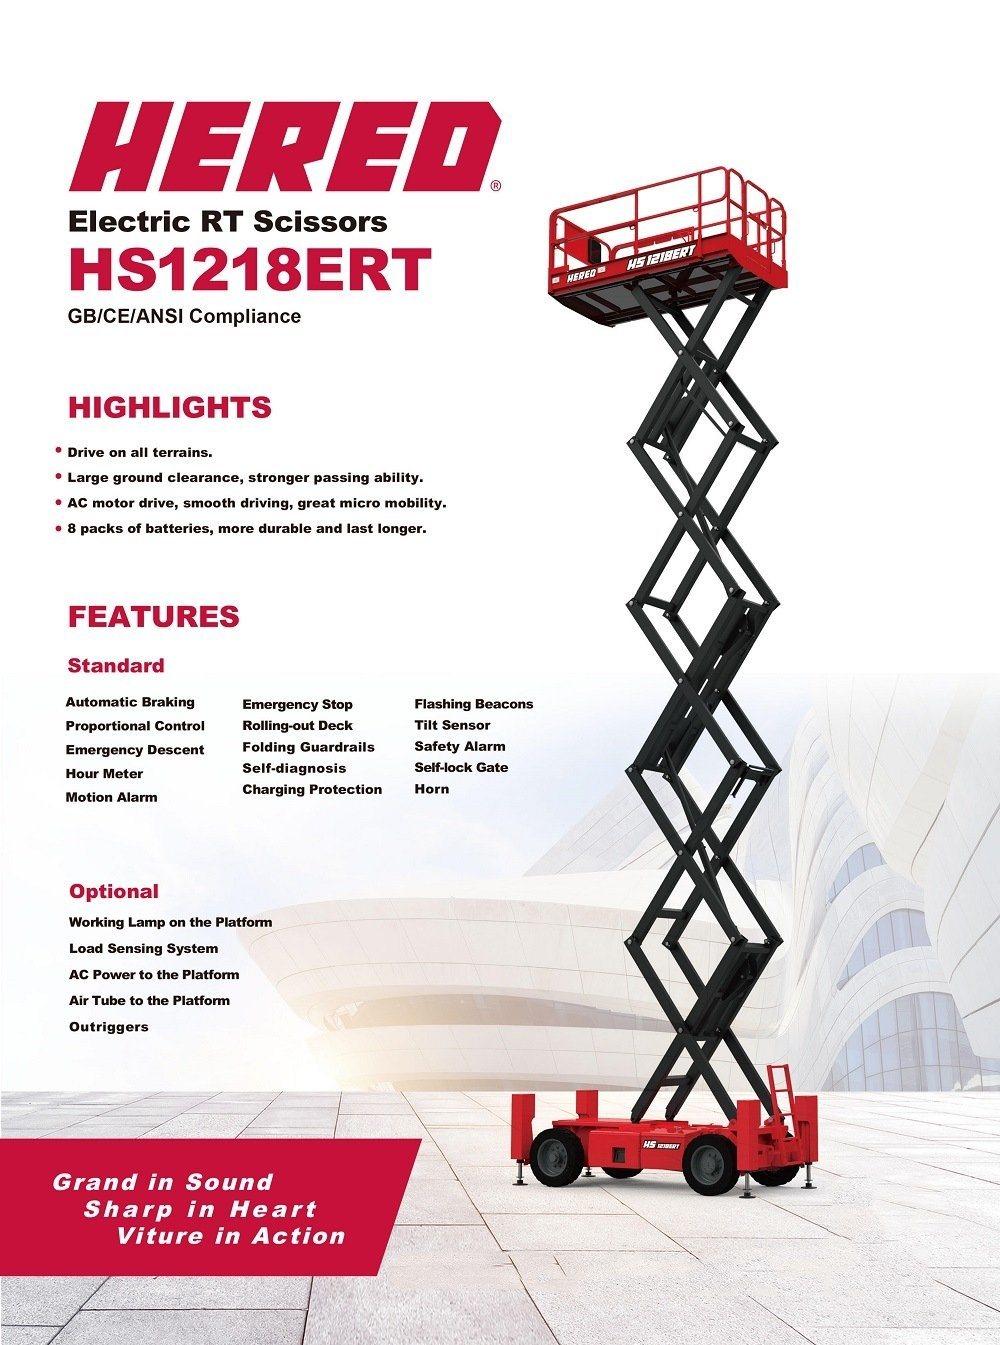 Hered Brand HS1218ert 12m 14m Heavy Duty Rough Terrain Outdoor Electric Hydraulic Scissors Type Scissor Lift Man Lift Aerial Work Platforms with Outrigger